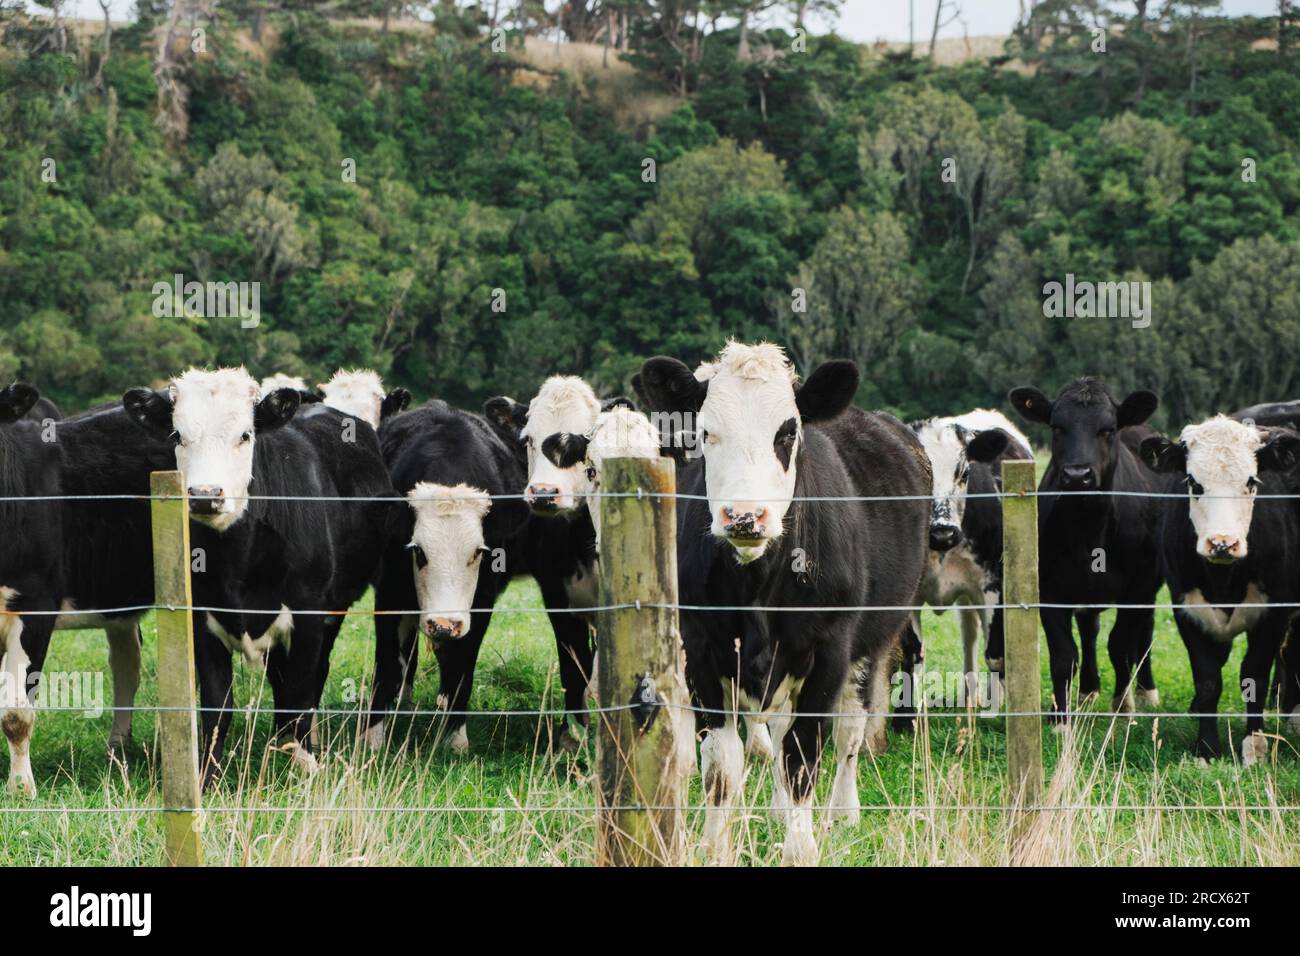 Cows in a paddock behind a fence Stock Photo